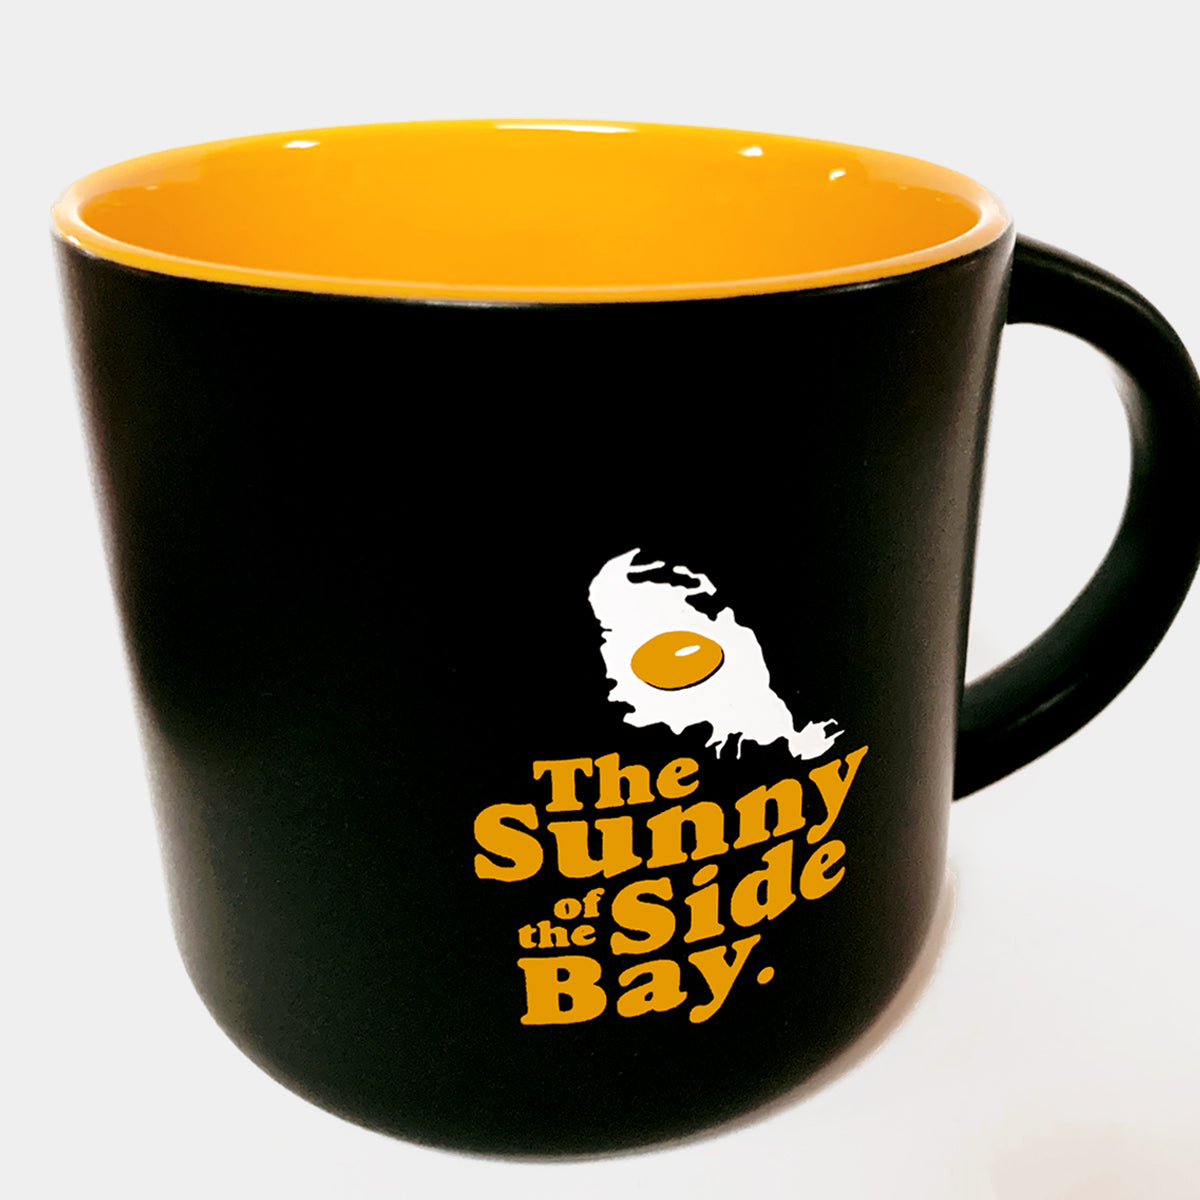 Black mug with yellow inside with picture of Oakland shaped sunny side up fried egg and words The Sunny Side Of The Bay.